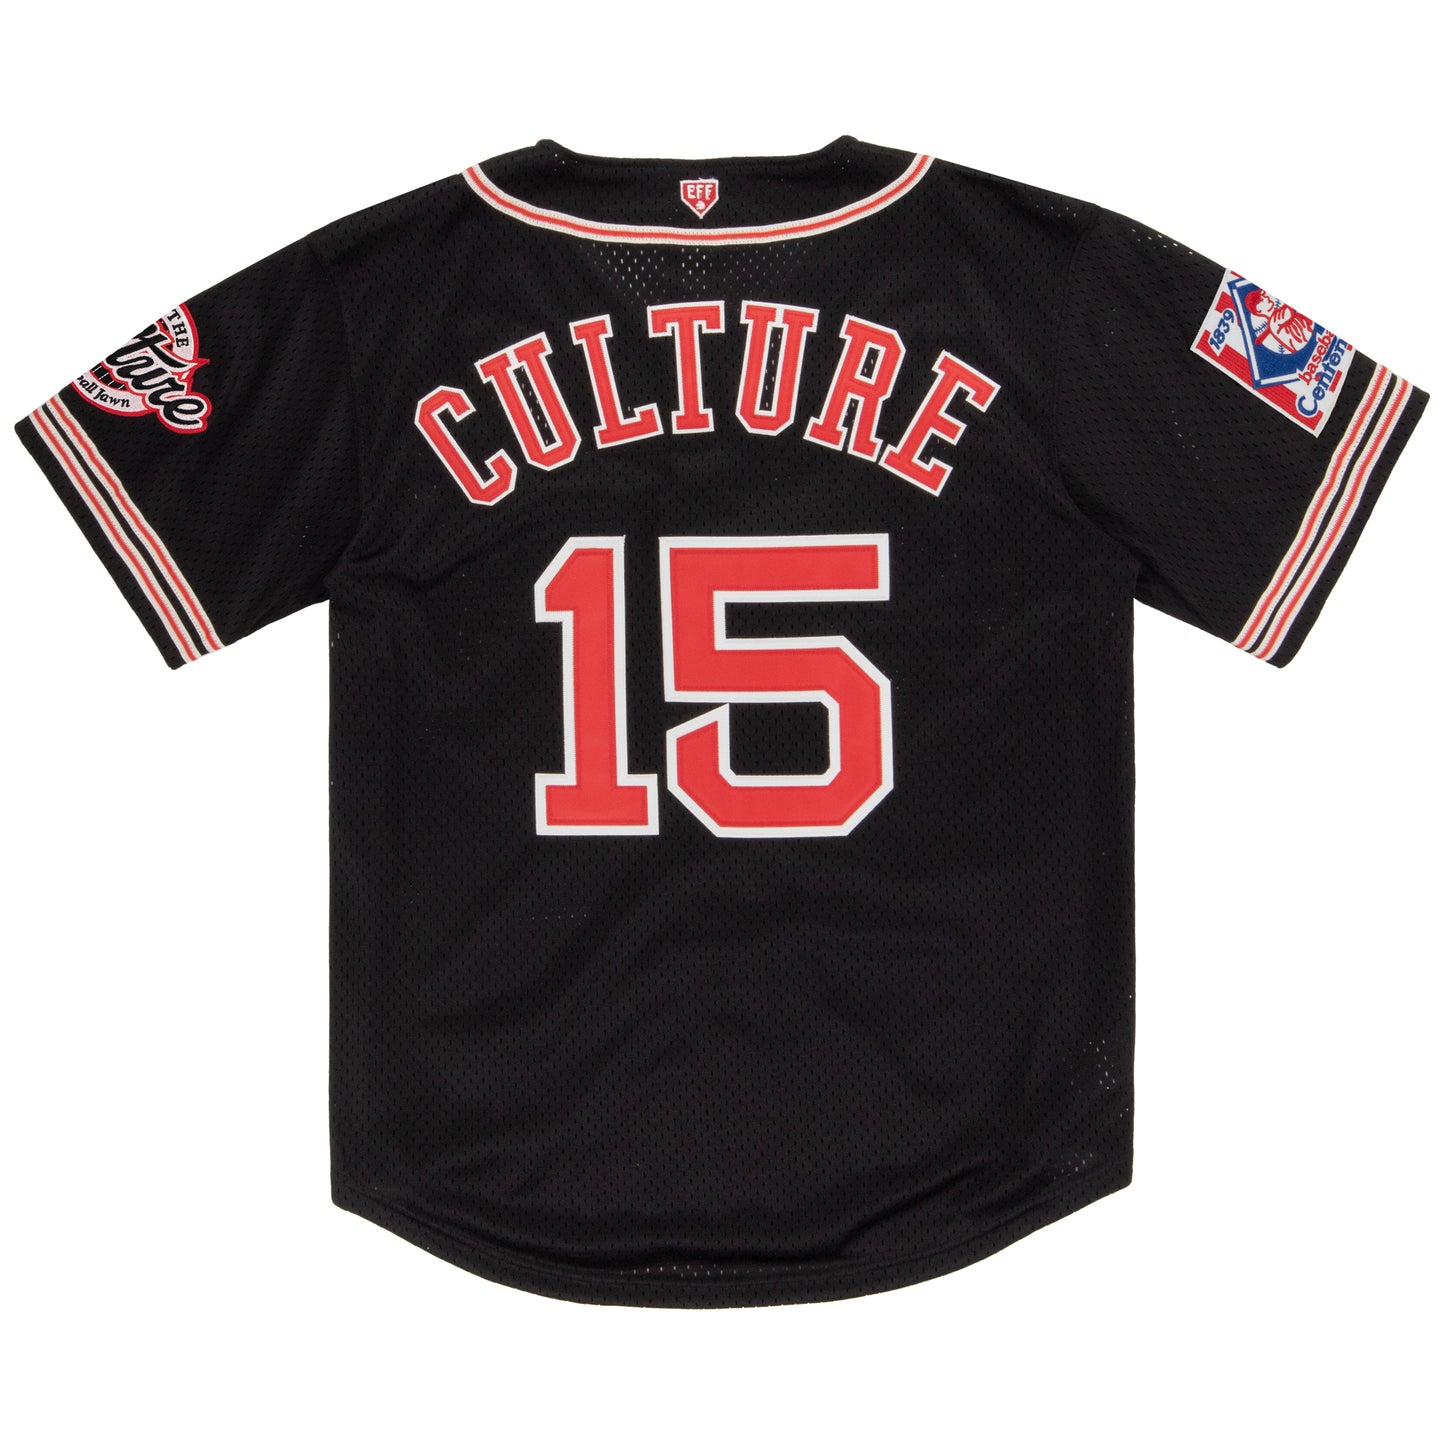 Cultural Excellence x Philadelphia Stars Button Down Jersey